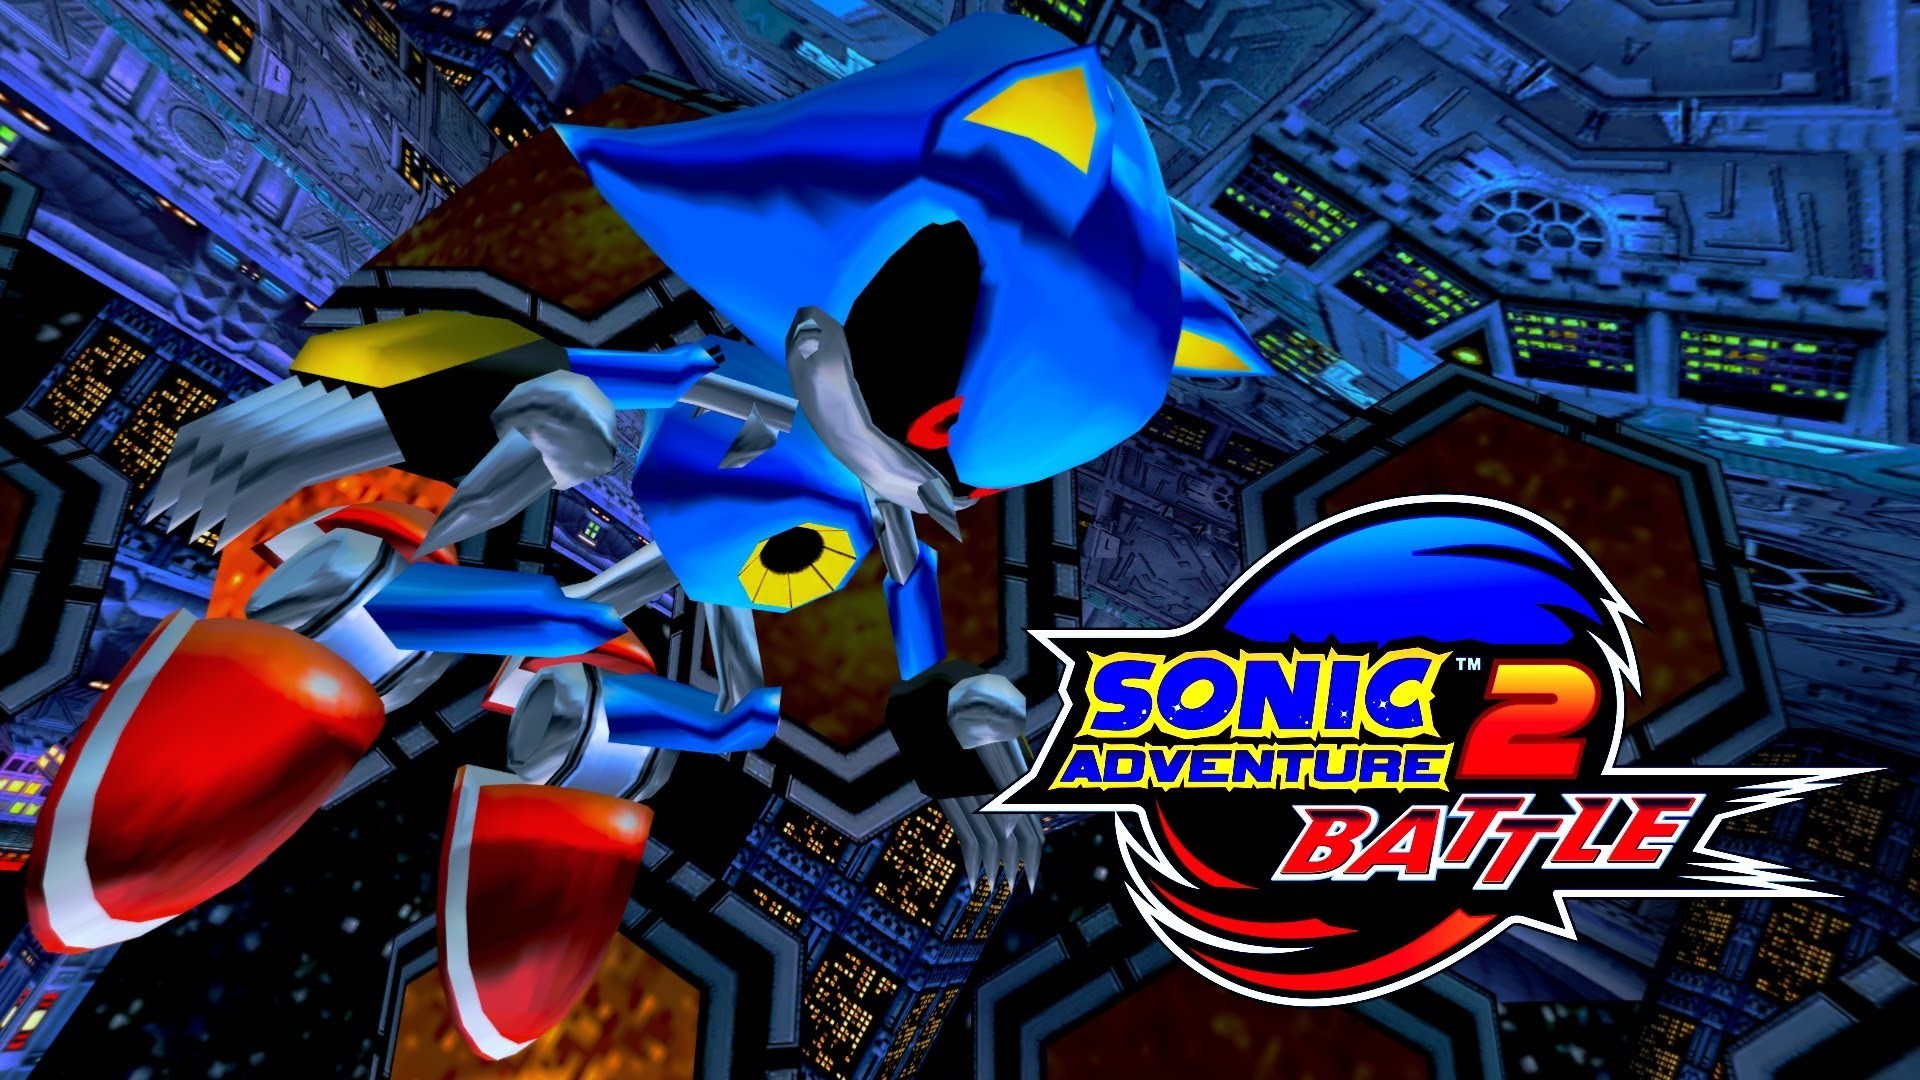 1920x1080 Sonic Adventure 2: Battle - Final Chase - Metal Sonic [REAL Full HD,  Widescreen] - YouTube